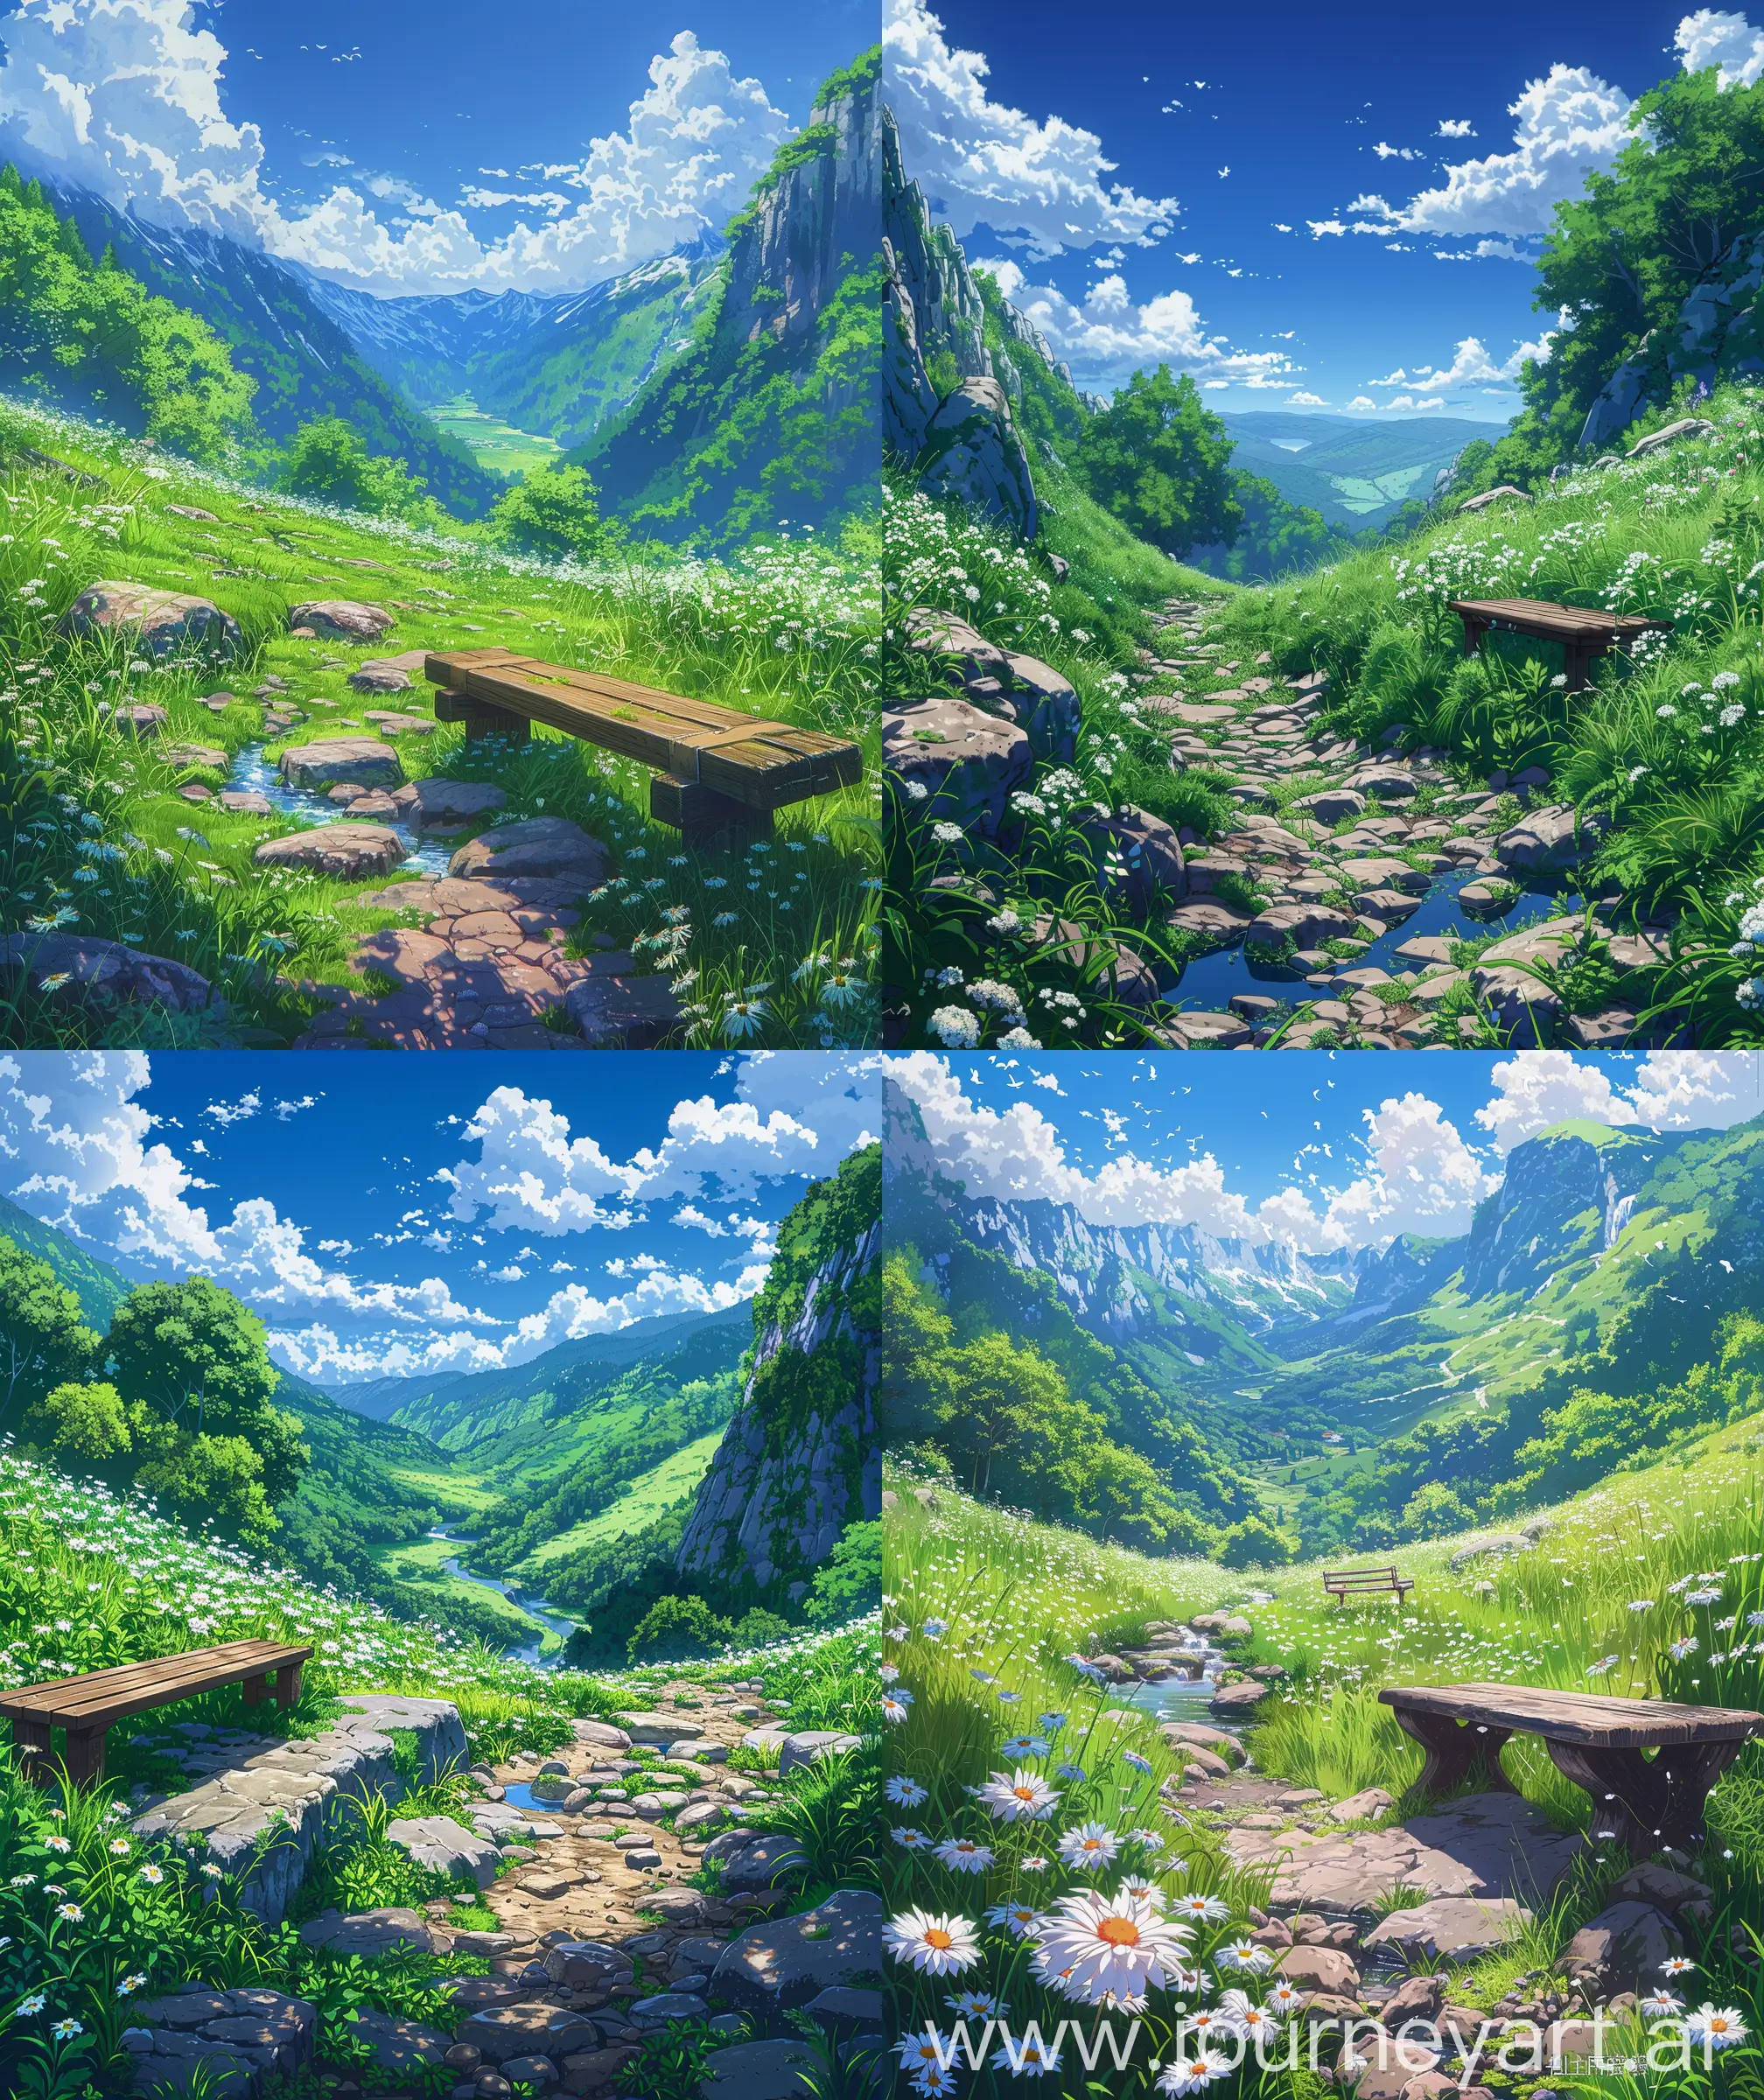 Anime scenary , mokoto shinkai and ghibli mix scenary, valley stream , stone, grass, Blue sky, sunny weather, nature beautiful view, quite and calm nature, grass, bench , grass, white flowers, close up view, vibrant and quite look, ultra HD, high quality, sharp details , no hyperrealistic, --ar 27:32 --s 400